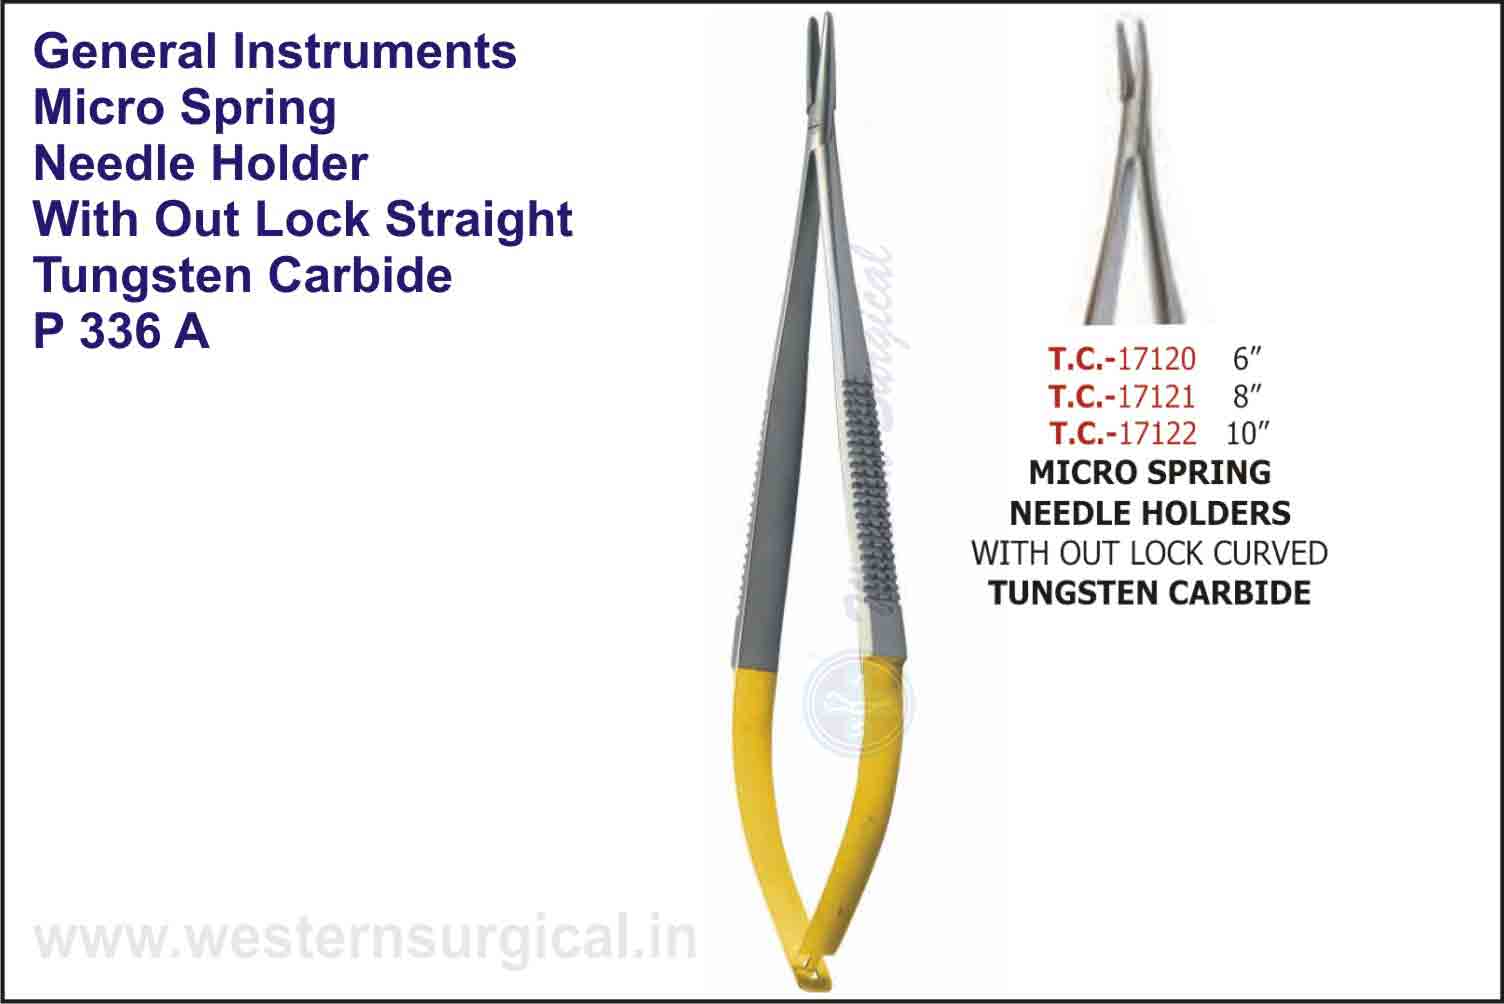 MICRO SPRING NEEDLE HOLDER WITH OUT LOCK STRAIGHT & CURVED - TUNGSTEN CARBIDE